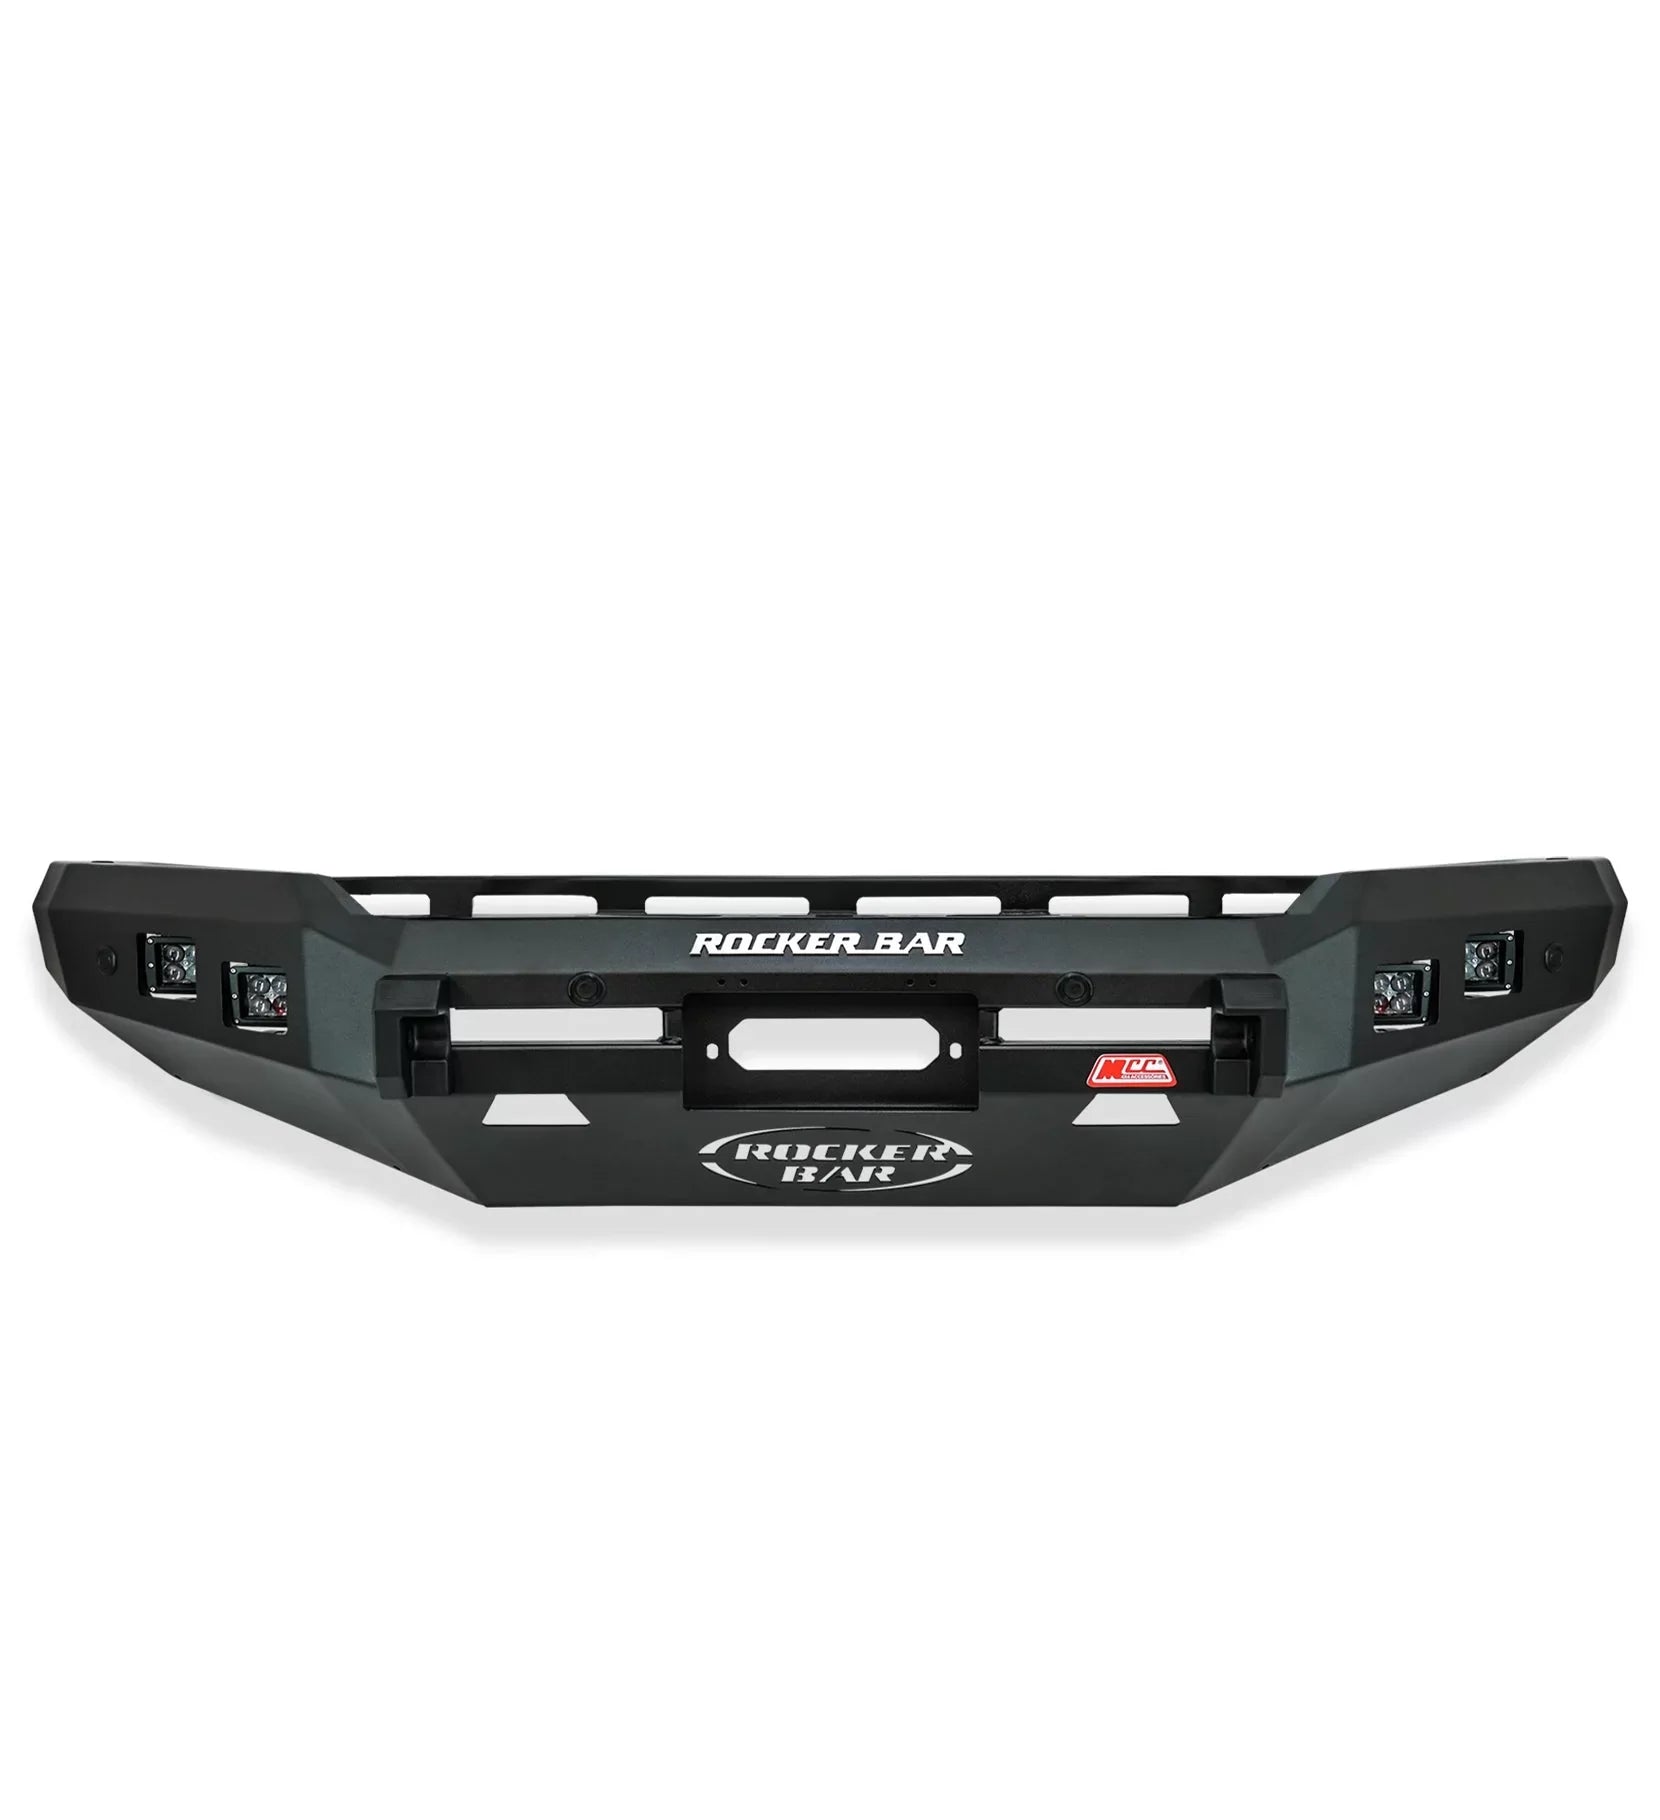 Hilux 05-11 078-01sq Rocker Front Bar Square Light No Loop + Bracket + Underprotection Plate If Available